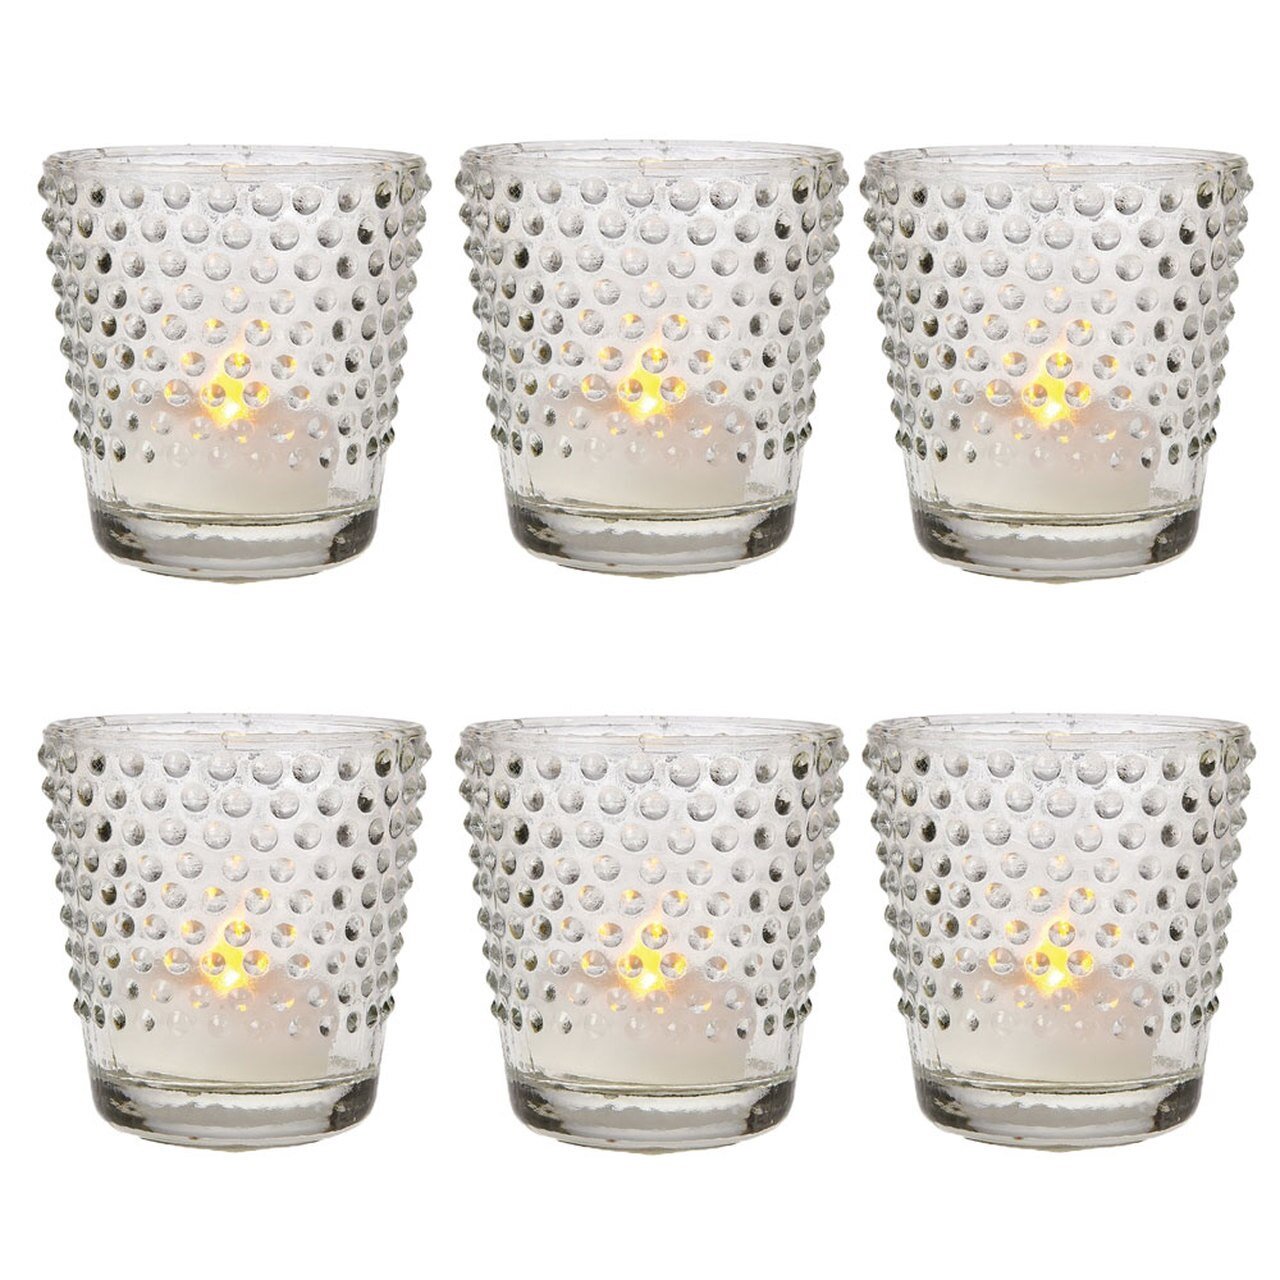 6 Pack | Hobnail Glass Candle Holder (2.5-Inch, Candace Design, Clear) - Use with Tea Lights - For Home Decor, Parties, and Wedding Decorations - AsianImportStore.com - B2B Wholesale Lighting & Decor since 2002